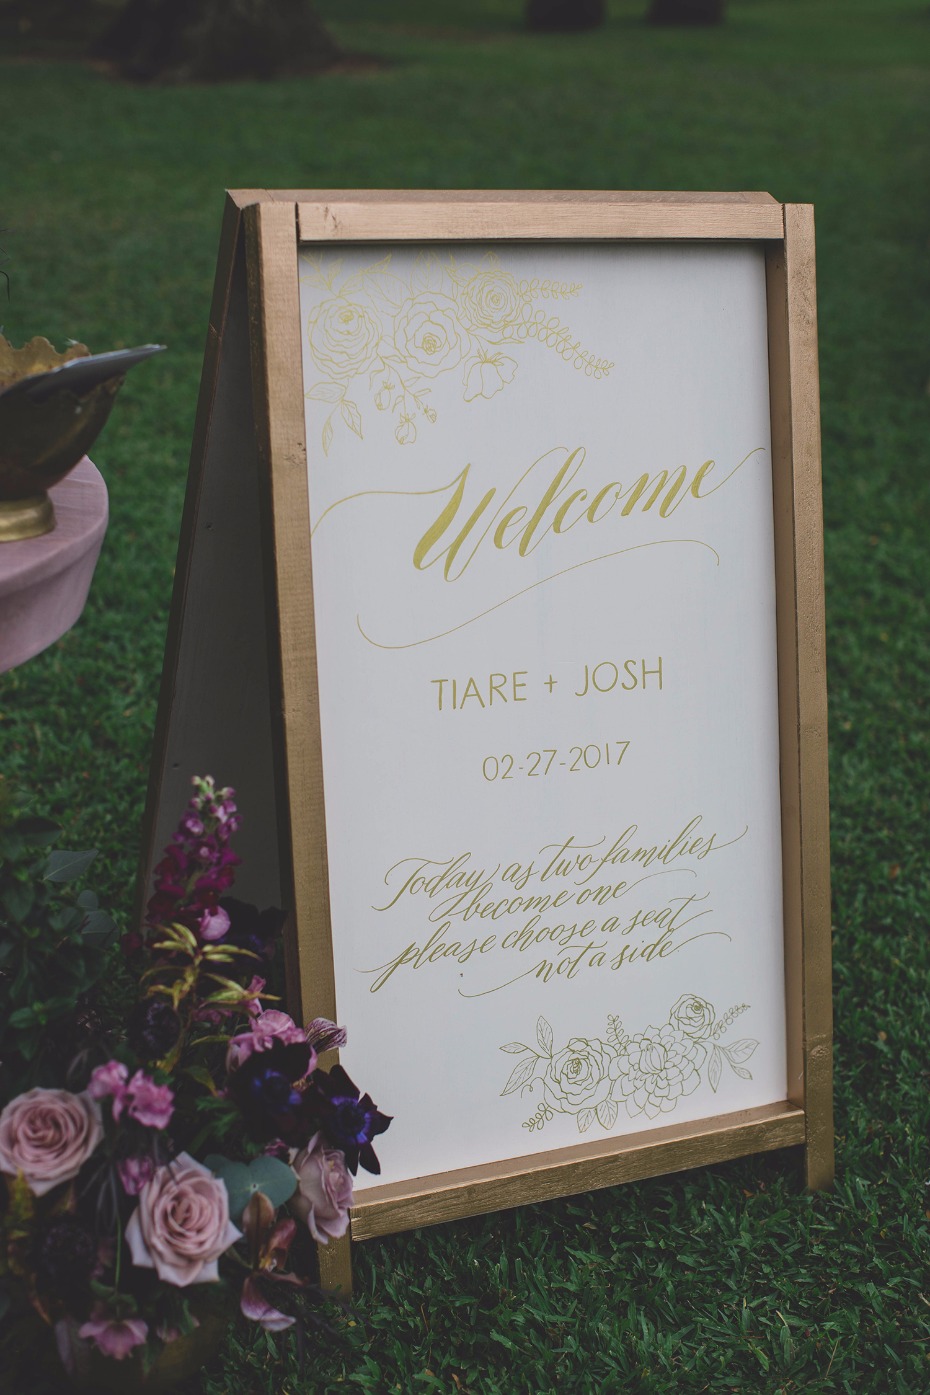 Welcome wedding sign in a gold frame